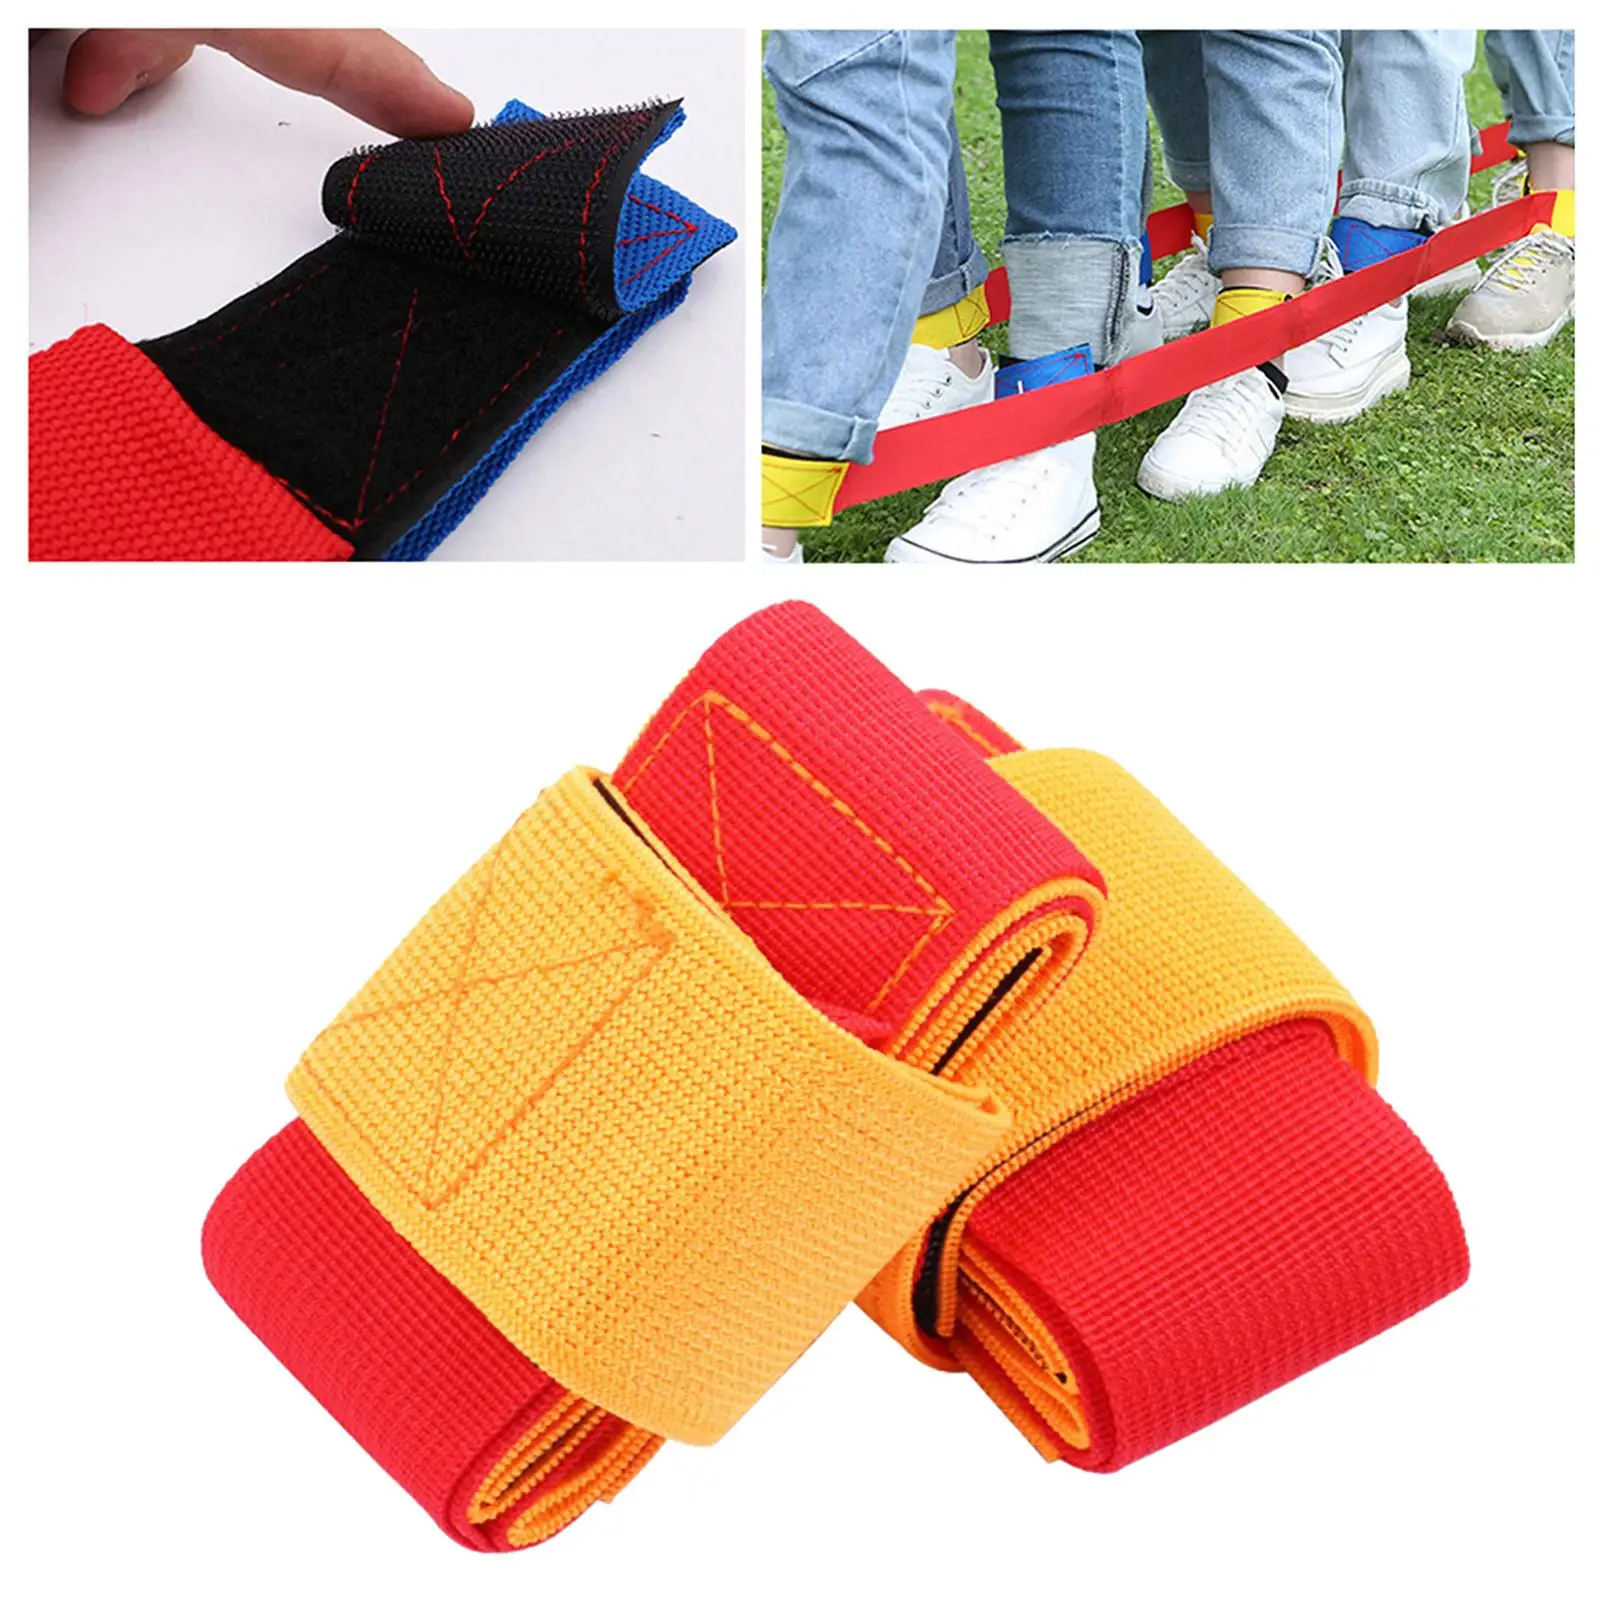  3-Legged Race Bands Elastic Tie Rope Perfect for Relay Race Game, Carnival, Field Day, Backyard for Teamwork Kids 